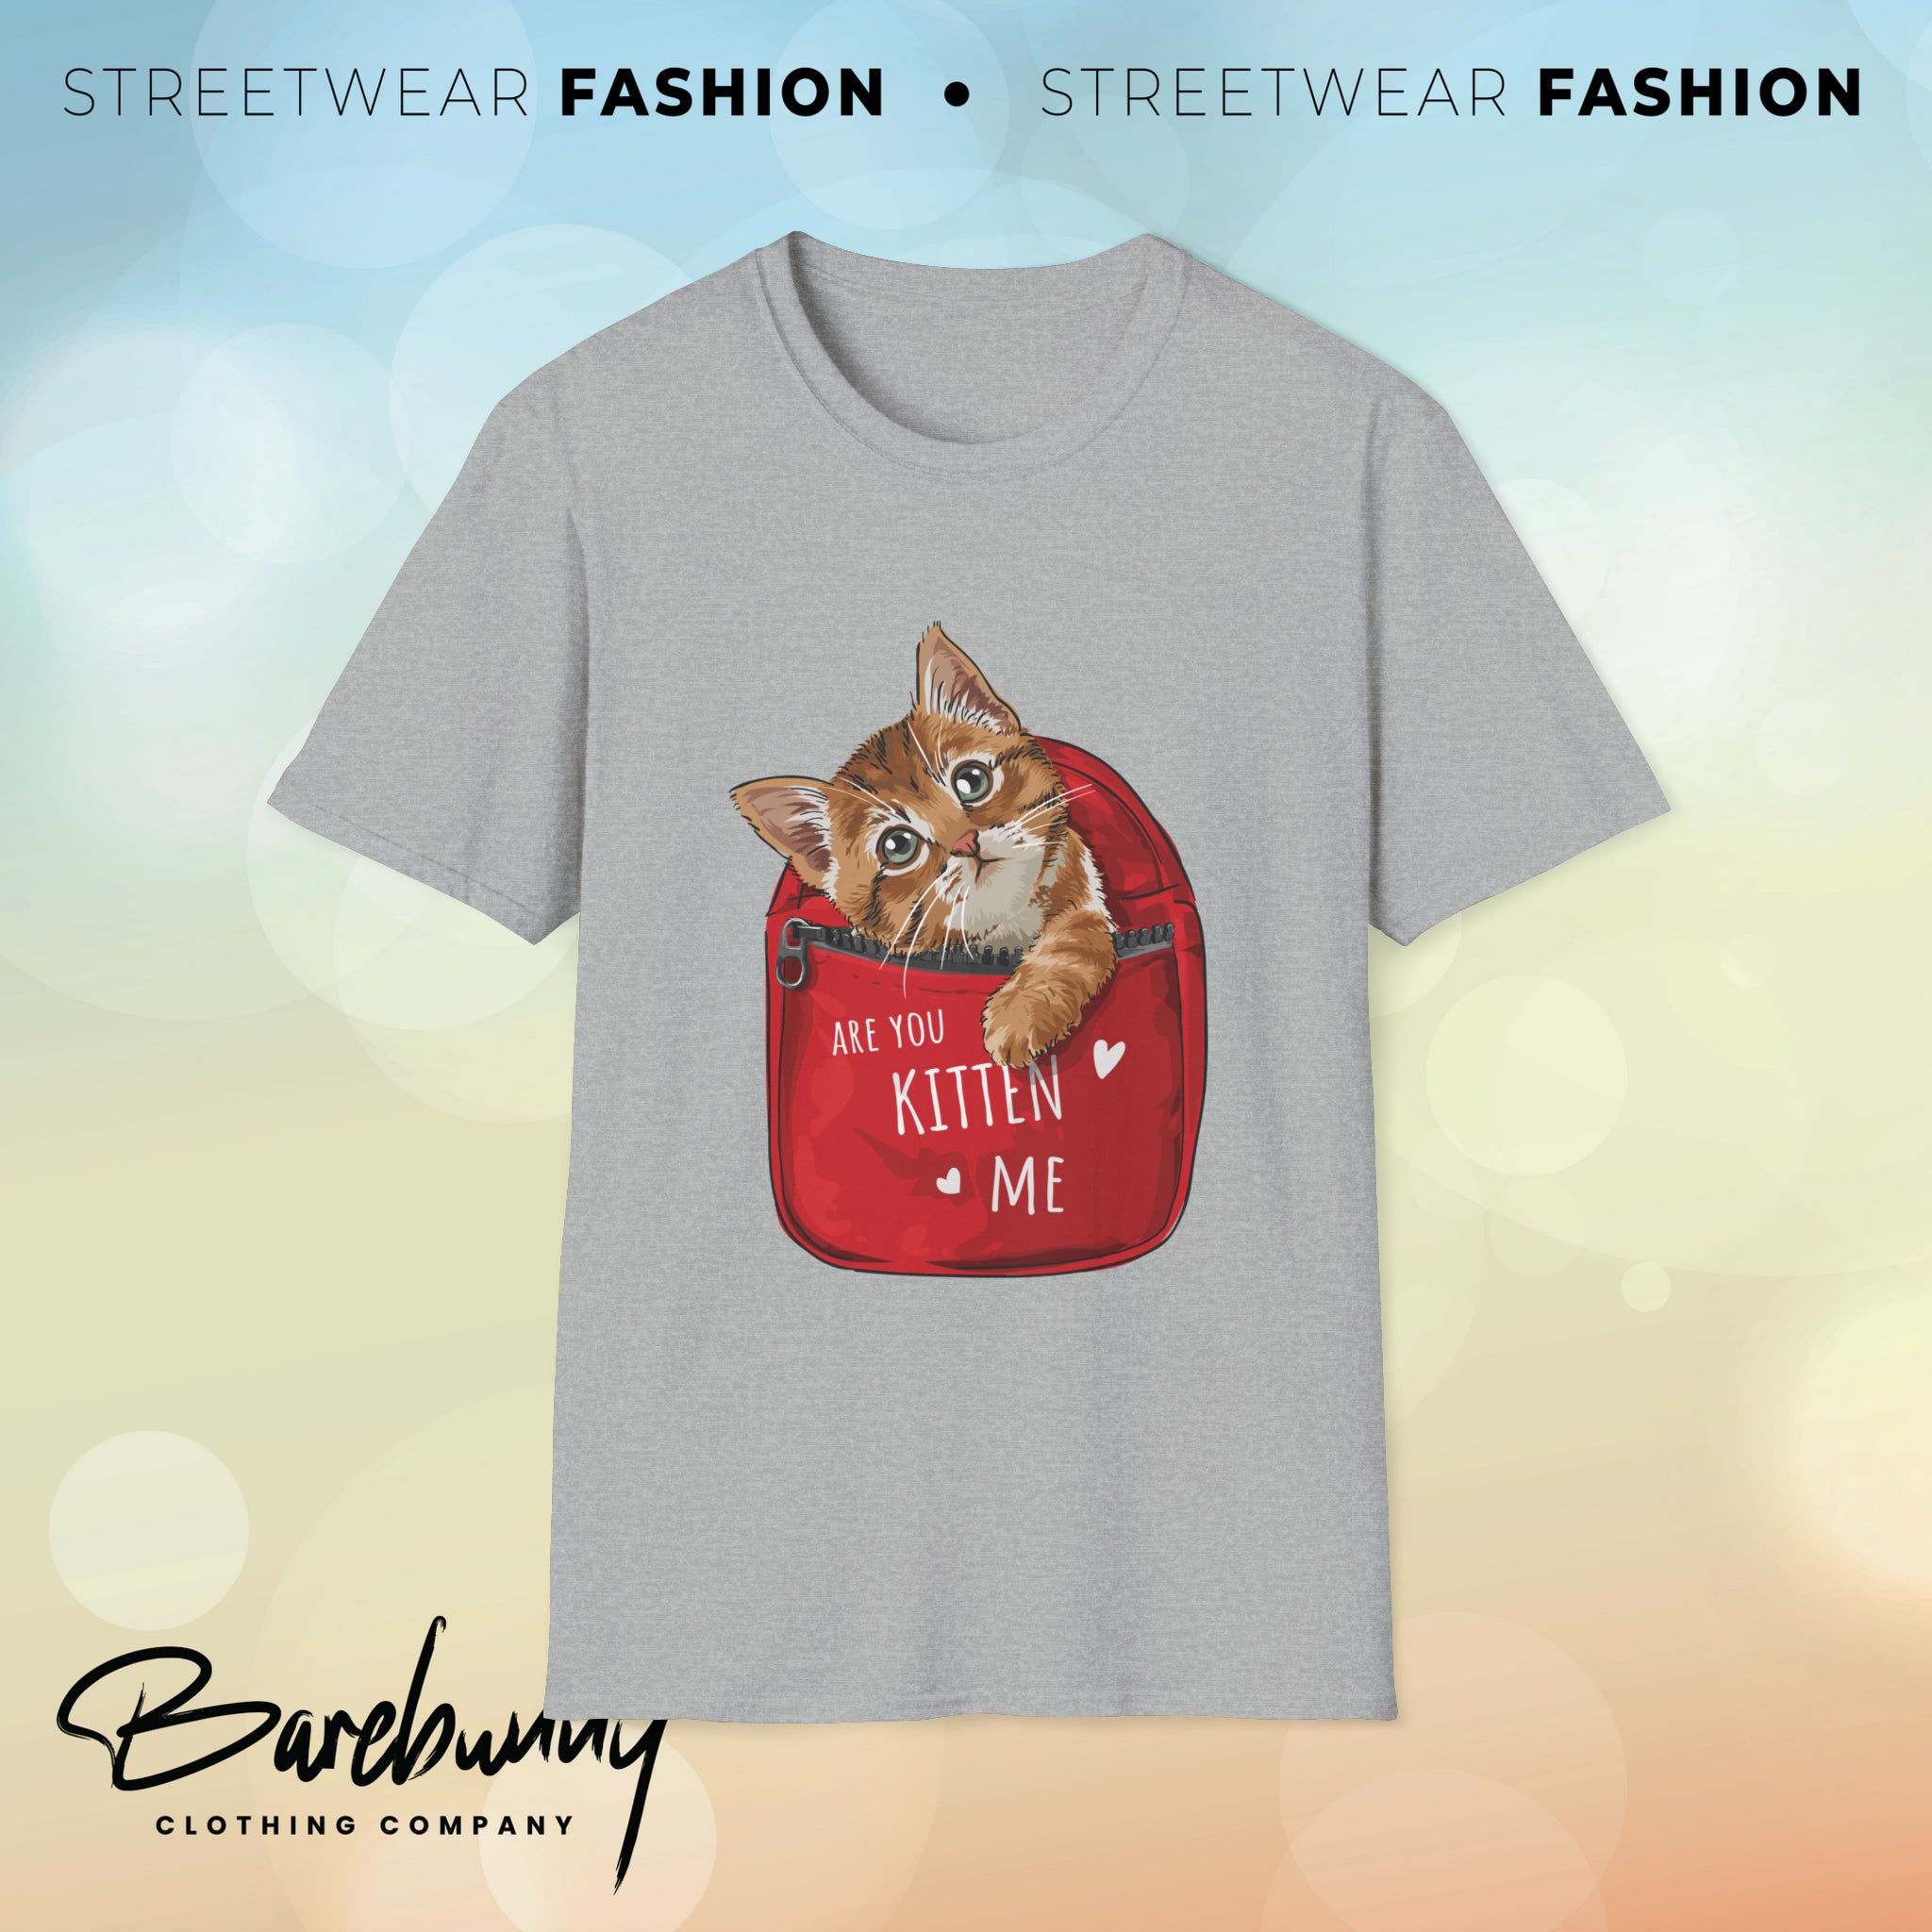 Are you kitten me - Unisex Softstyle T-Shirt (DTF)